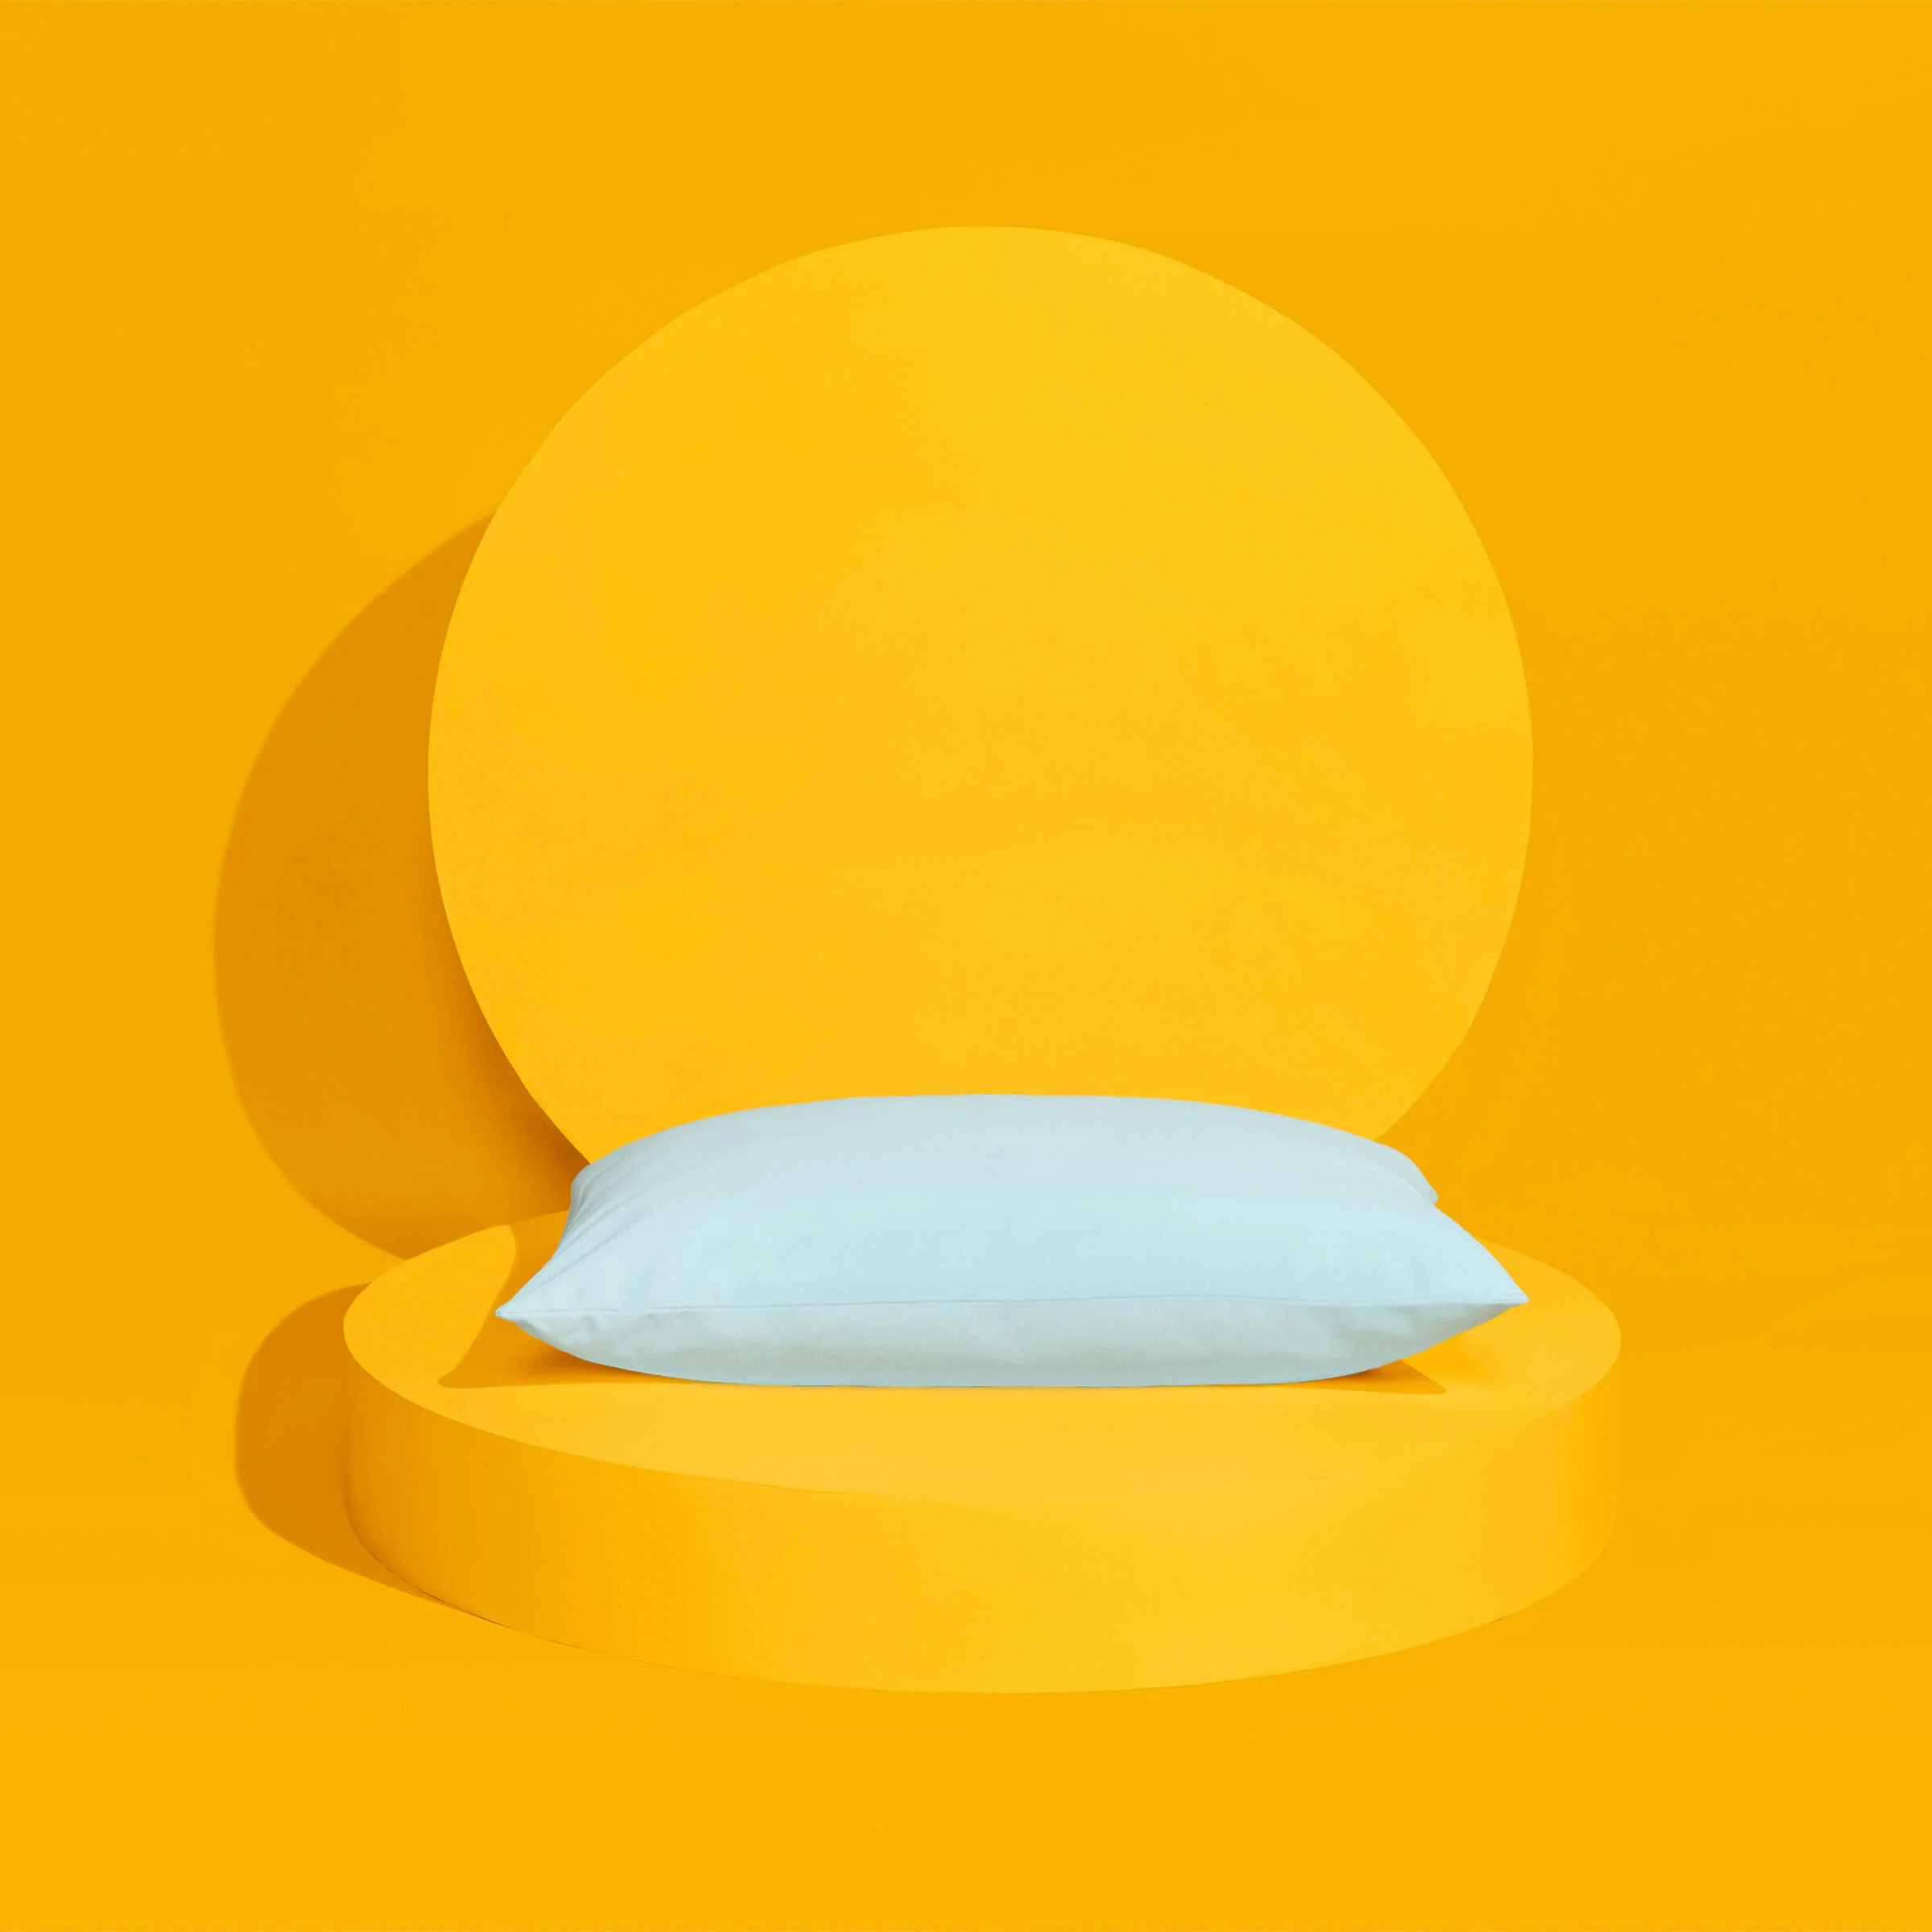 Buy Cloud Pillow Online @Upto 50% + Extra 20% off